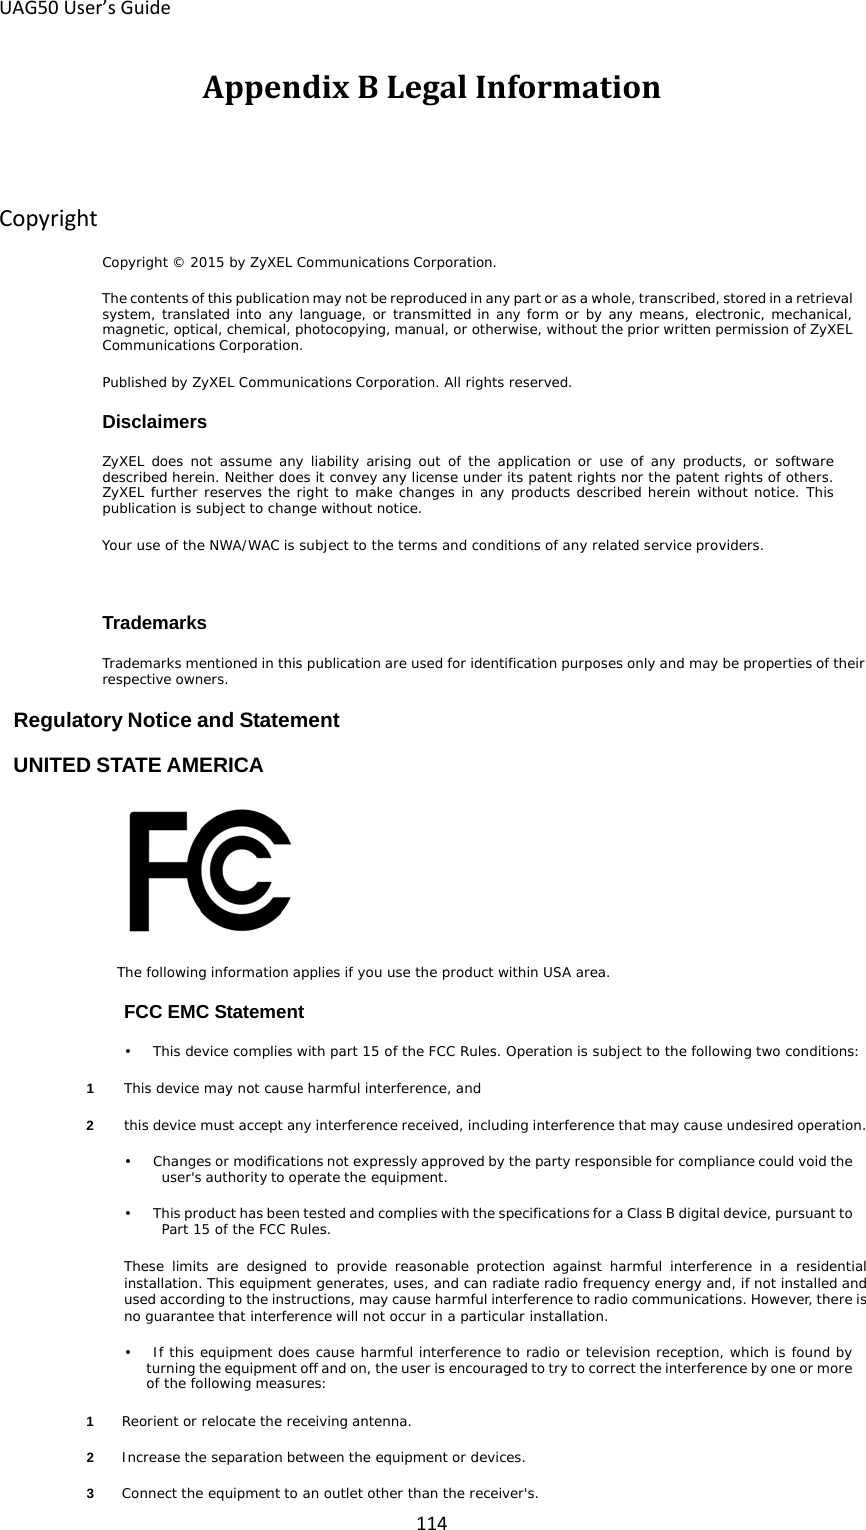 UAG50 User’s Guide 114 Appendix B Legal Information Copyright Copyright © 2015 by ZyXEL Communications Corporation. The contents of this publication may not be reproduced in any part or as a whole, transcribed, stored in a retrieval system, translated into any language, or transmitted in any form or by any means, electronic, mechanical, magnetic, optical, chemical, photocopying, manual, or otherwise, without the prior written permission of ZyXEL Communications Corporation. Published by ZyXEL Communications Corporation. All rights reserved. Disclaimers ZyXEL does not assume any liability arising out of  the  application or  use of any products, or  software described herein. Neither does it convey any license under its patent rights nor the patent rights of others. ZyXEL further reserves the right to make changes in any products described herein without notice. This publication is subject to change without notice. Your use of the NWA/WAC is subject to the terms and conditions of any related service providers.  Trademarks Trademarks mentioned in this publication are used for identification purposes only and may be properties of their respective owners. Regulatory Notice and Statement UNITED STATE AMERICA  The following information applies if you use the product within USA area. FCC EMC Statement •    This device complies with part 15 of the FCC Rules. Operation is subject to the following two conditions: 1  This device may not cause harmful interference, and 2  this device must accept any interference received, including interference that may cause undesired operation. •    Changes or modifications not expressly approved by the party responsible for compliance could void the user&apos;s authority to operate the equipment. •    This product has been tested and complies with the specifications for a Class B digital device, pursuant to Part 15 of the FCC Rules.  These  limits  are designed  to provide reasonable  protection  against  harmful  interference in a residential installation. This equipment generates, uses, and can radiate radio frequency energy and, if not installed and used according to the instructions, may cause harmful interference to radio communications. However, there is no guarantee that interference will not occur in a particular installation. •    If this equipment does cause harmful interference to radio or television reception, which is found by turning the equipment off and on, the user is encouraged to try to correct the interference by one or more of the following measures: 1  Reorient or relocate the receiving antenna. 2  Increase the separation between the equipment or devices. 3  Connect the equipment to an outlet other than the receiver&apos;s. 